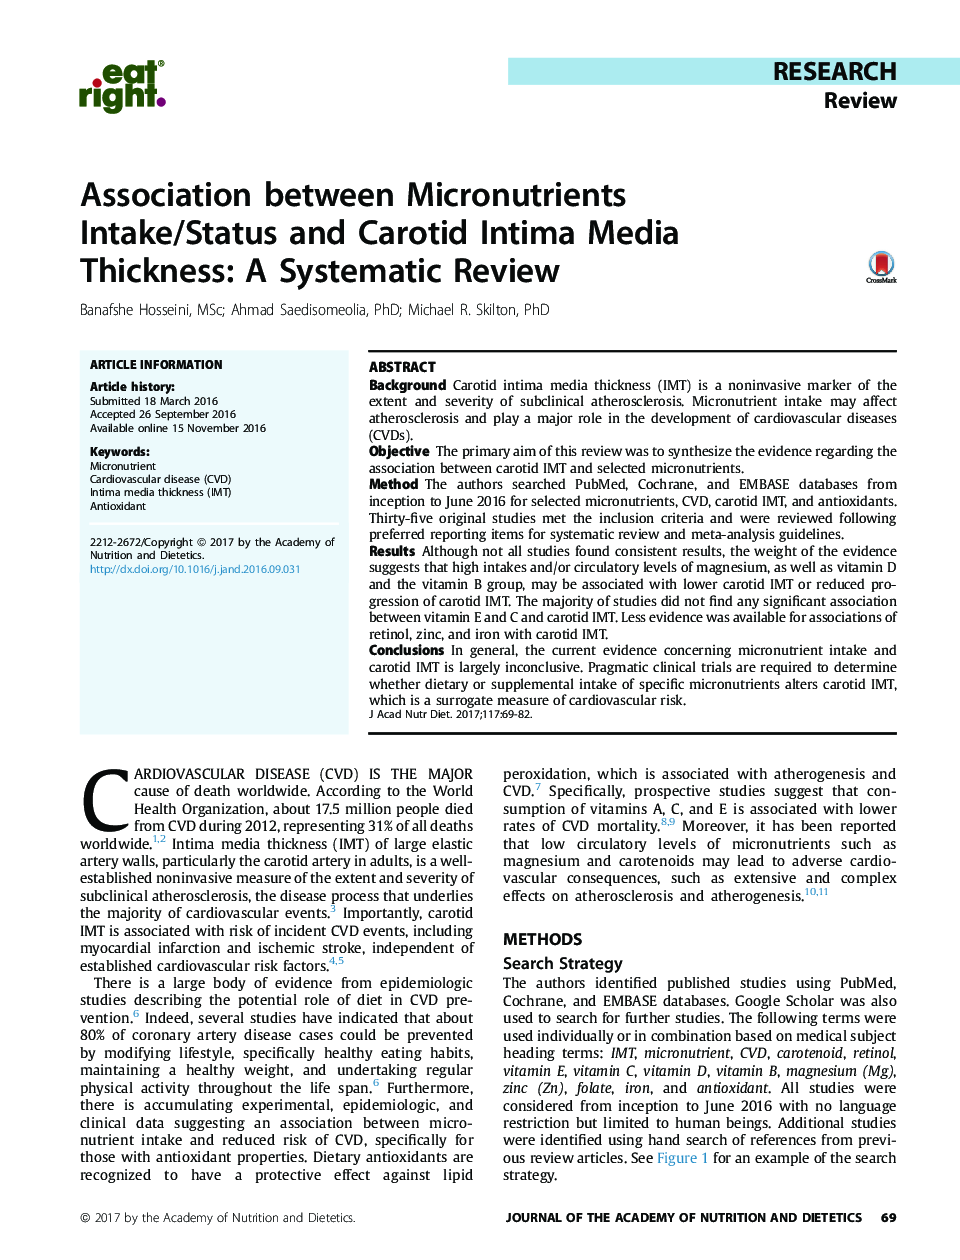 Association between Micronutrients Intake/Status and Carotid Intima Media Thickness: A Systematic Review